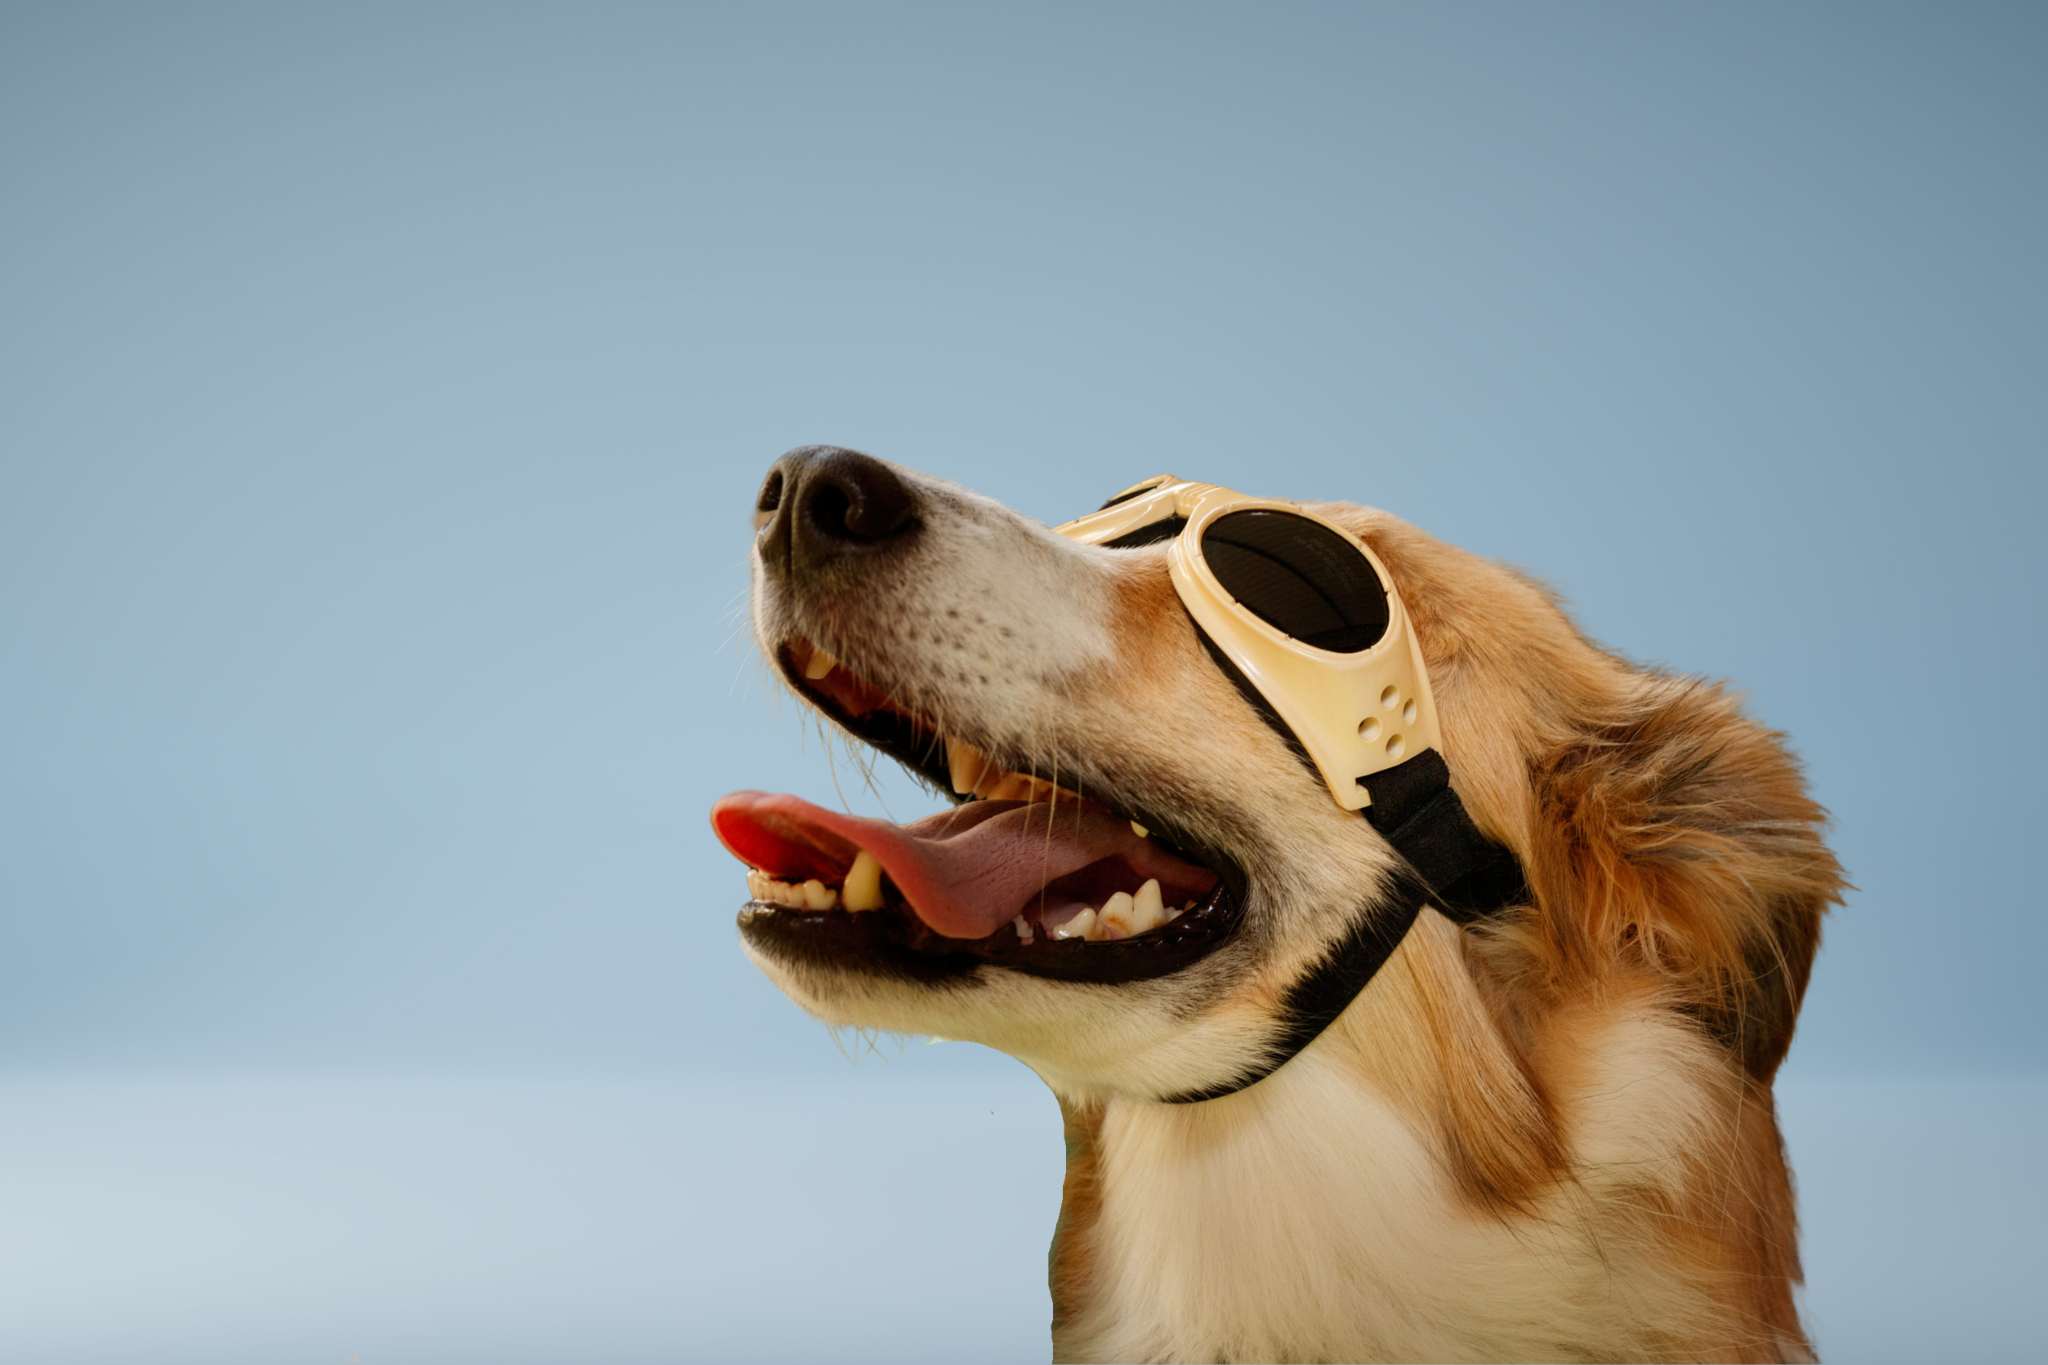 Golden Retriever With Goggles on for Laser Therapy